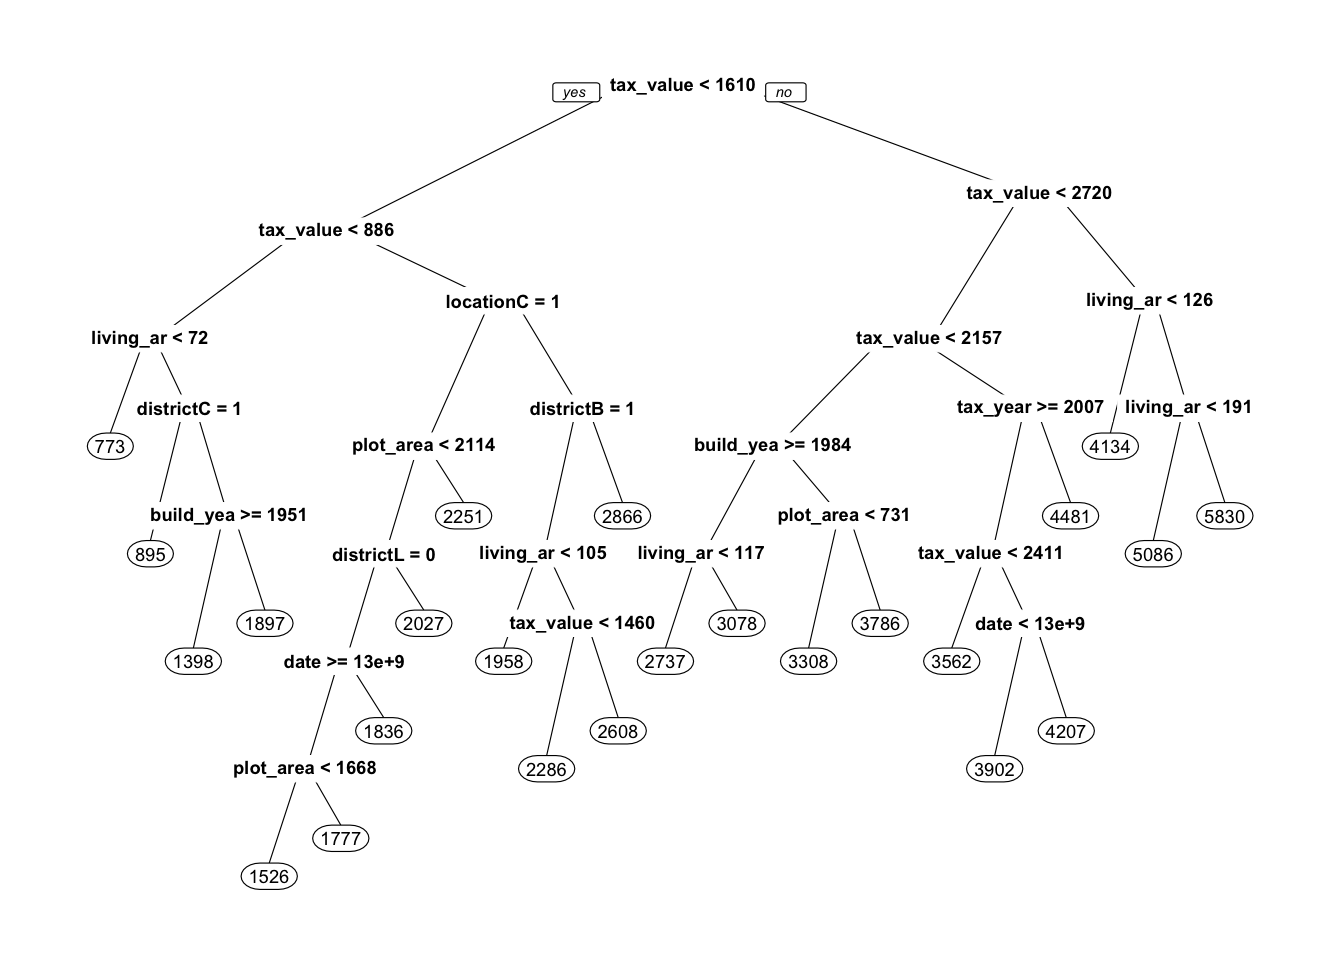 Decision tree for predicting real estate prices.